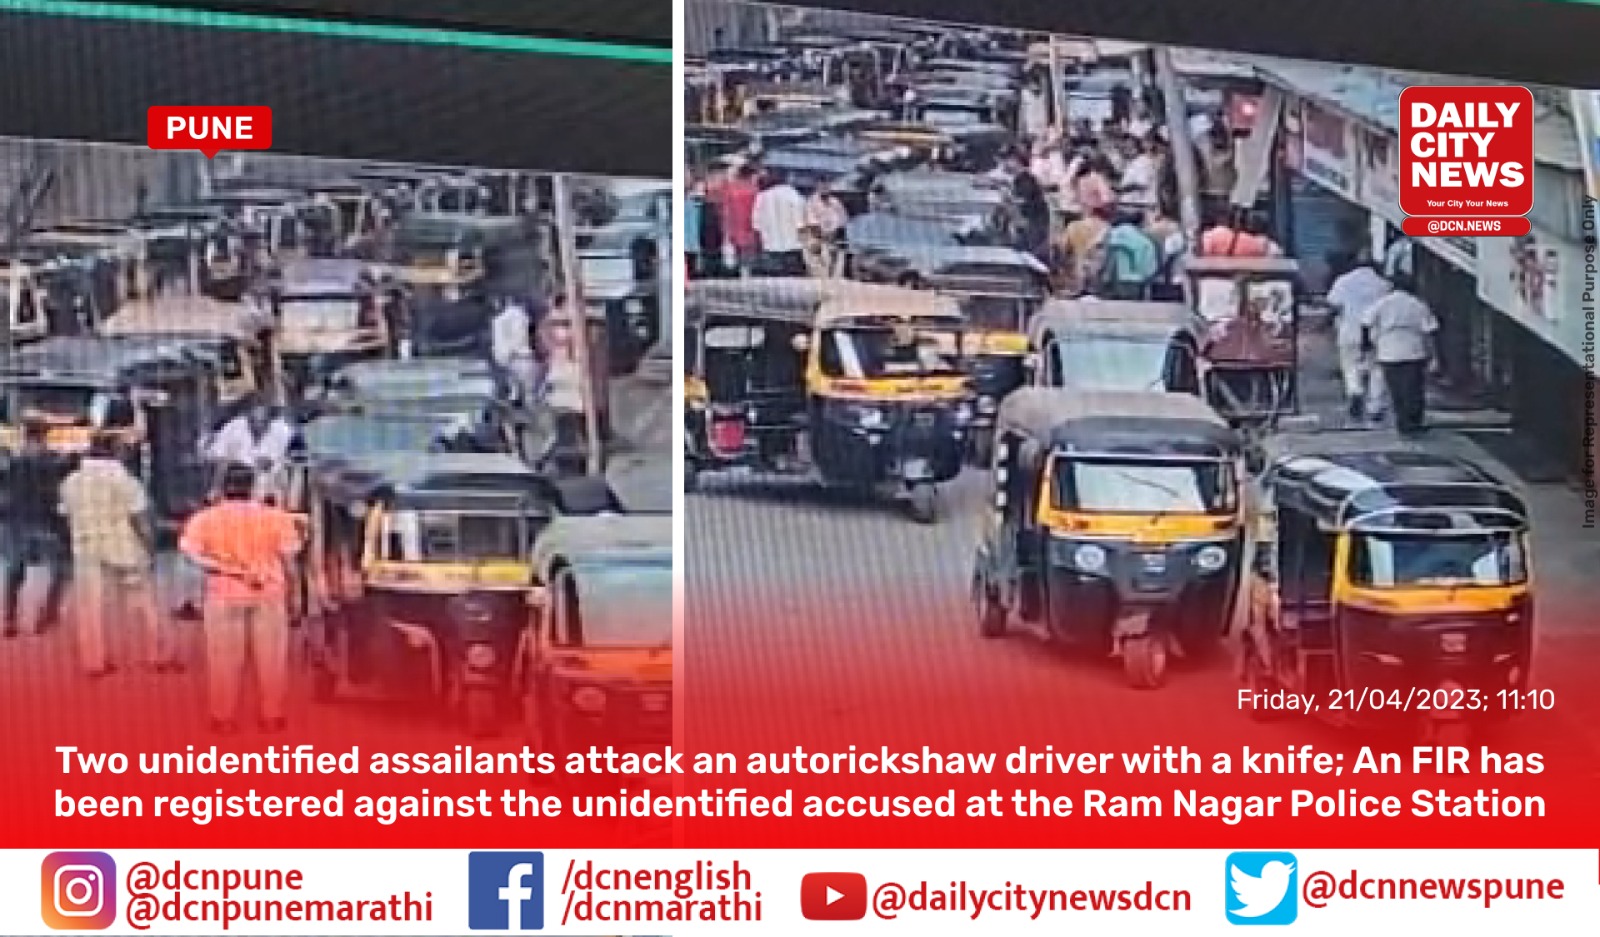  Two unidentified assailants attack an autorickshaw driver with a knife; An FIR has been registered against the unidentified accused at the Ram Nagar Police Station